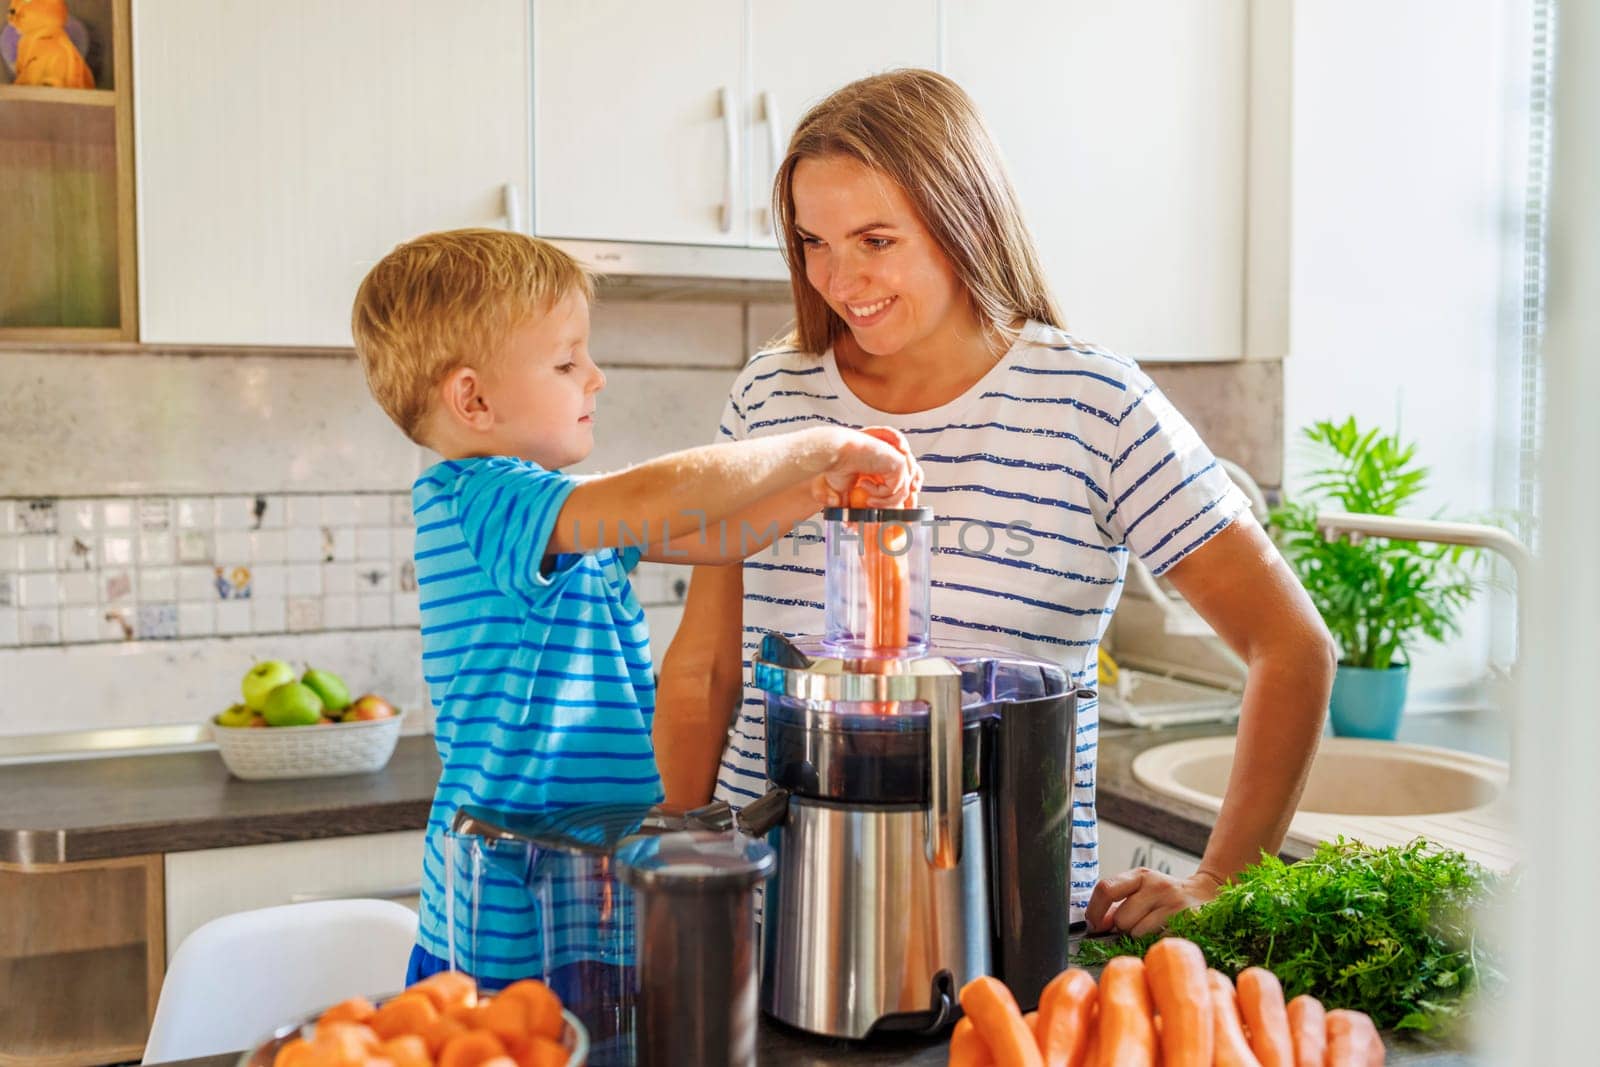 A young boy learns how to make carrot juice under his mother's guidance in a sunny home kitchen, surrounded by fresh ingredients.